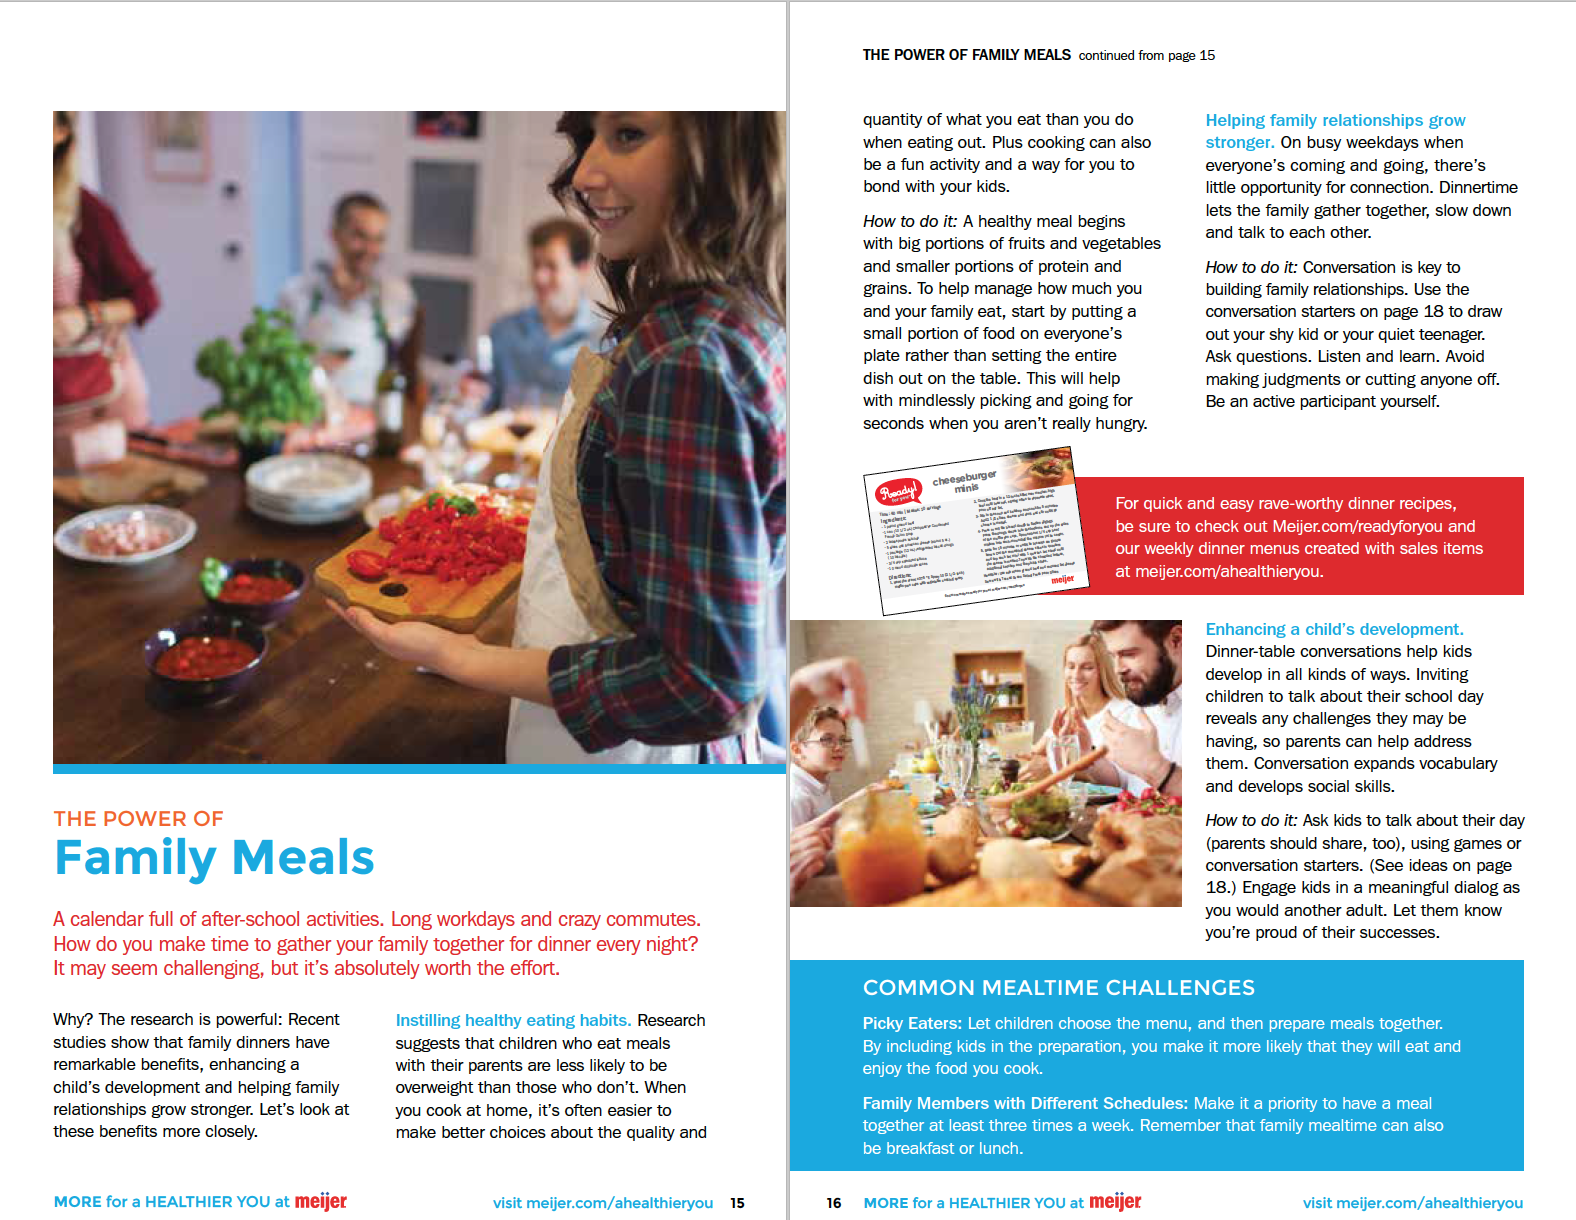 New work: Healthy Living News for Meijer | Bryn Mooth